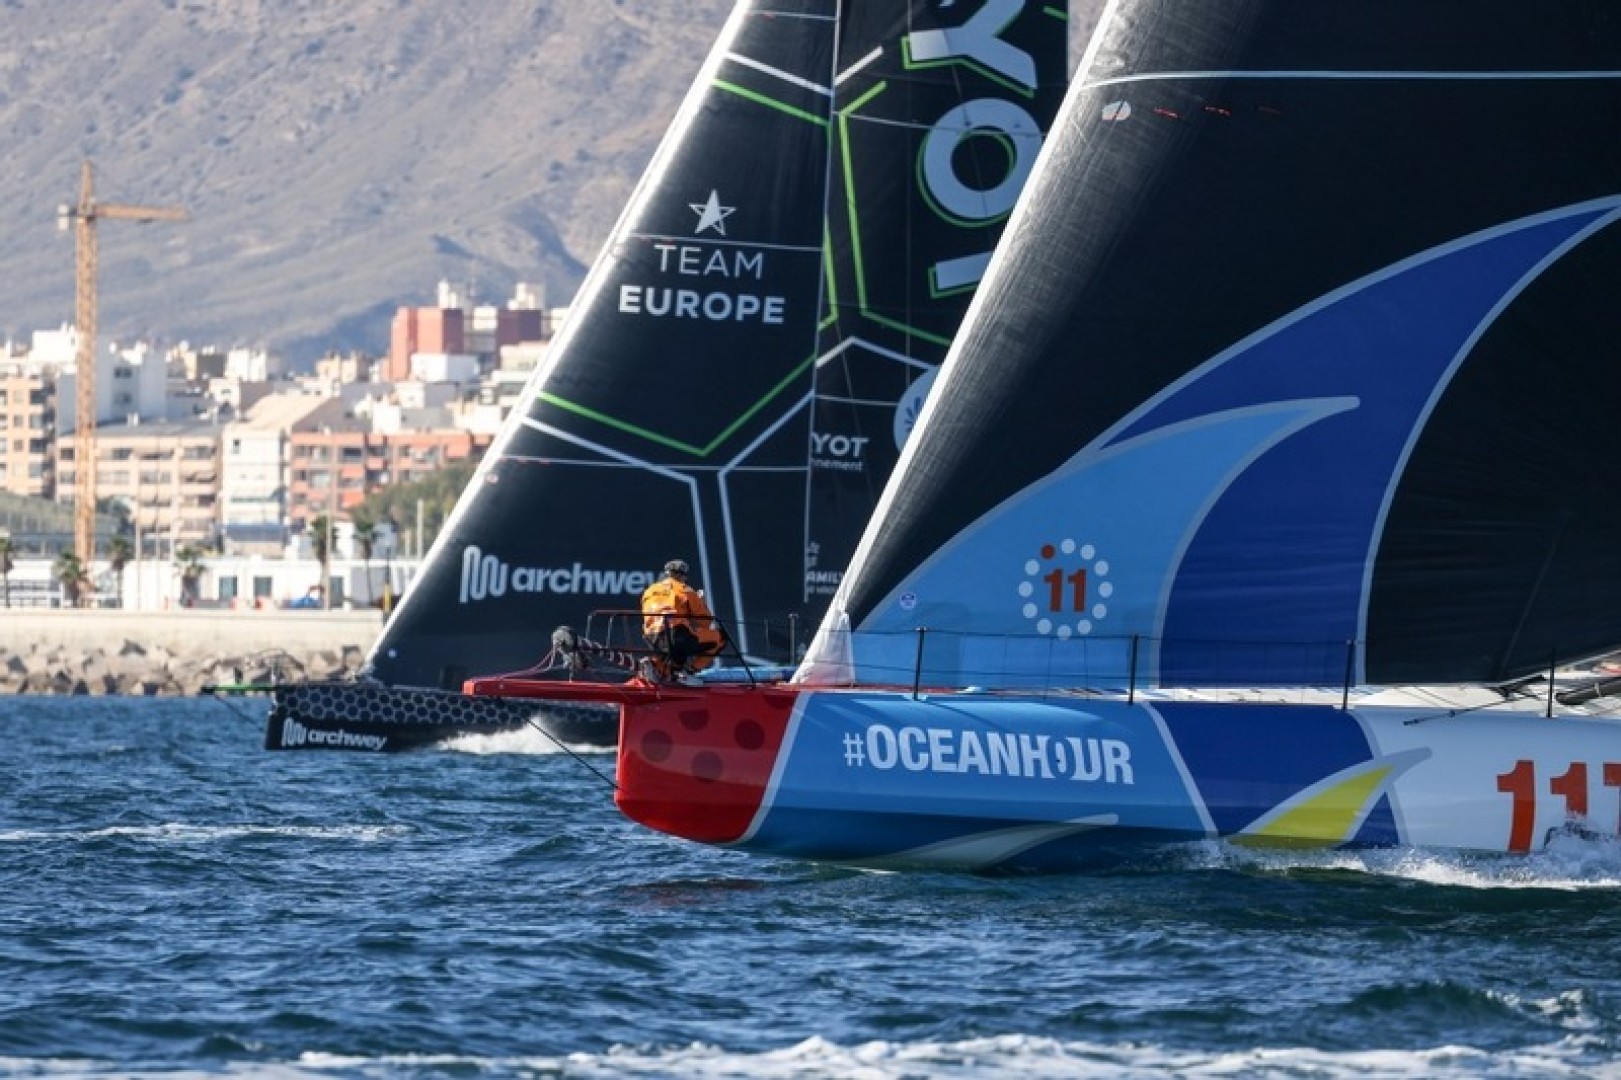 On the eve of historic race start, The Ocean Race outlines an exciting future